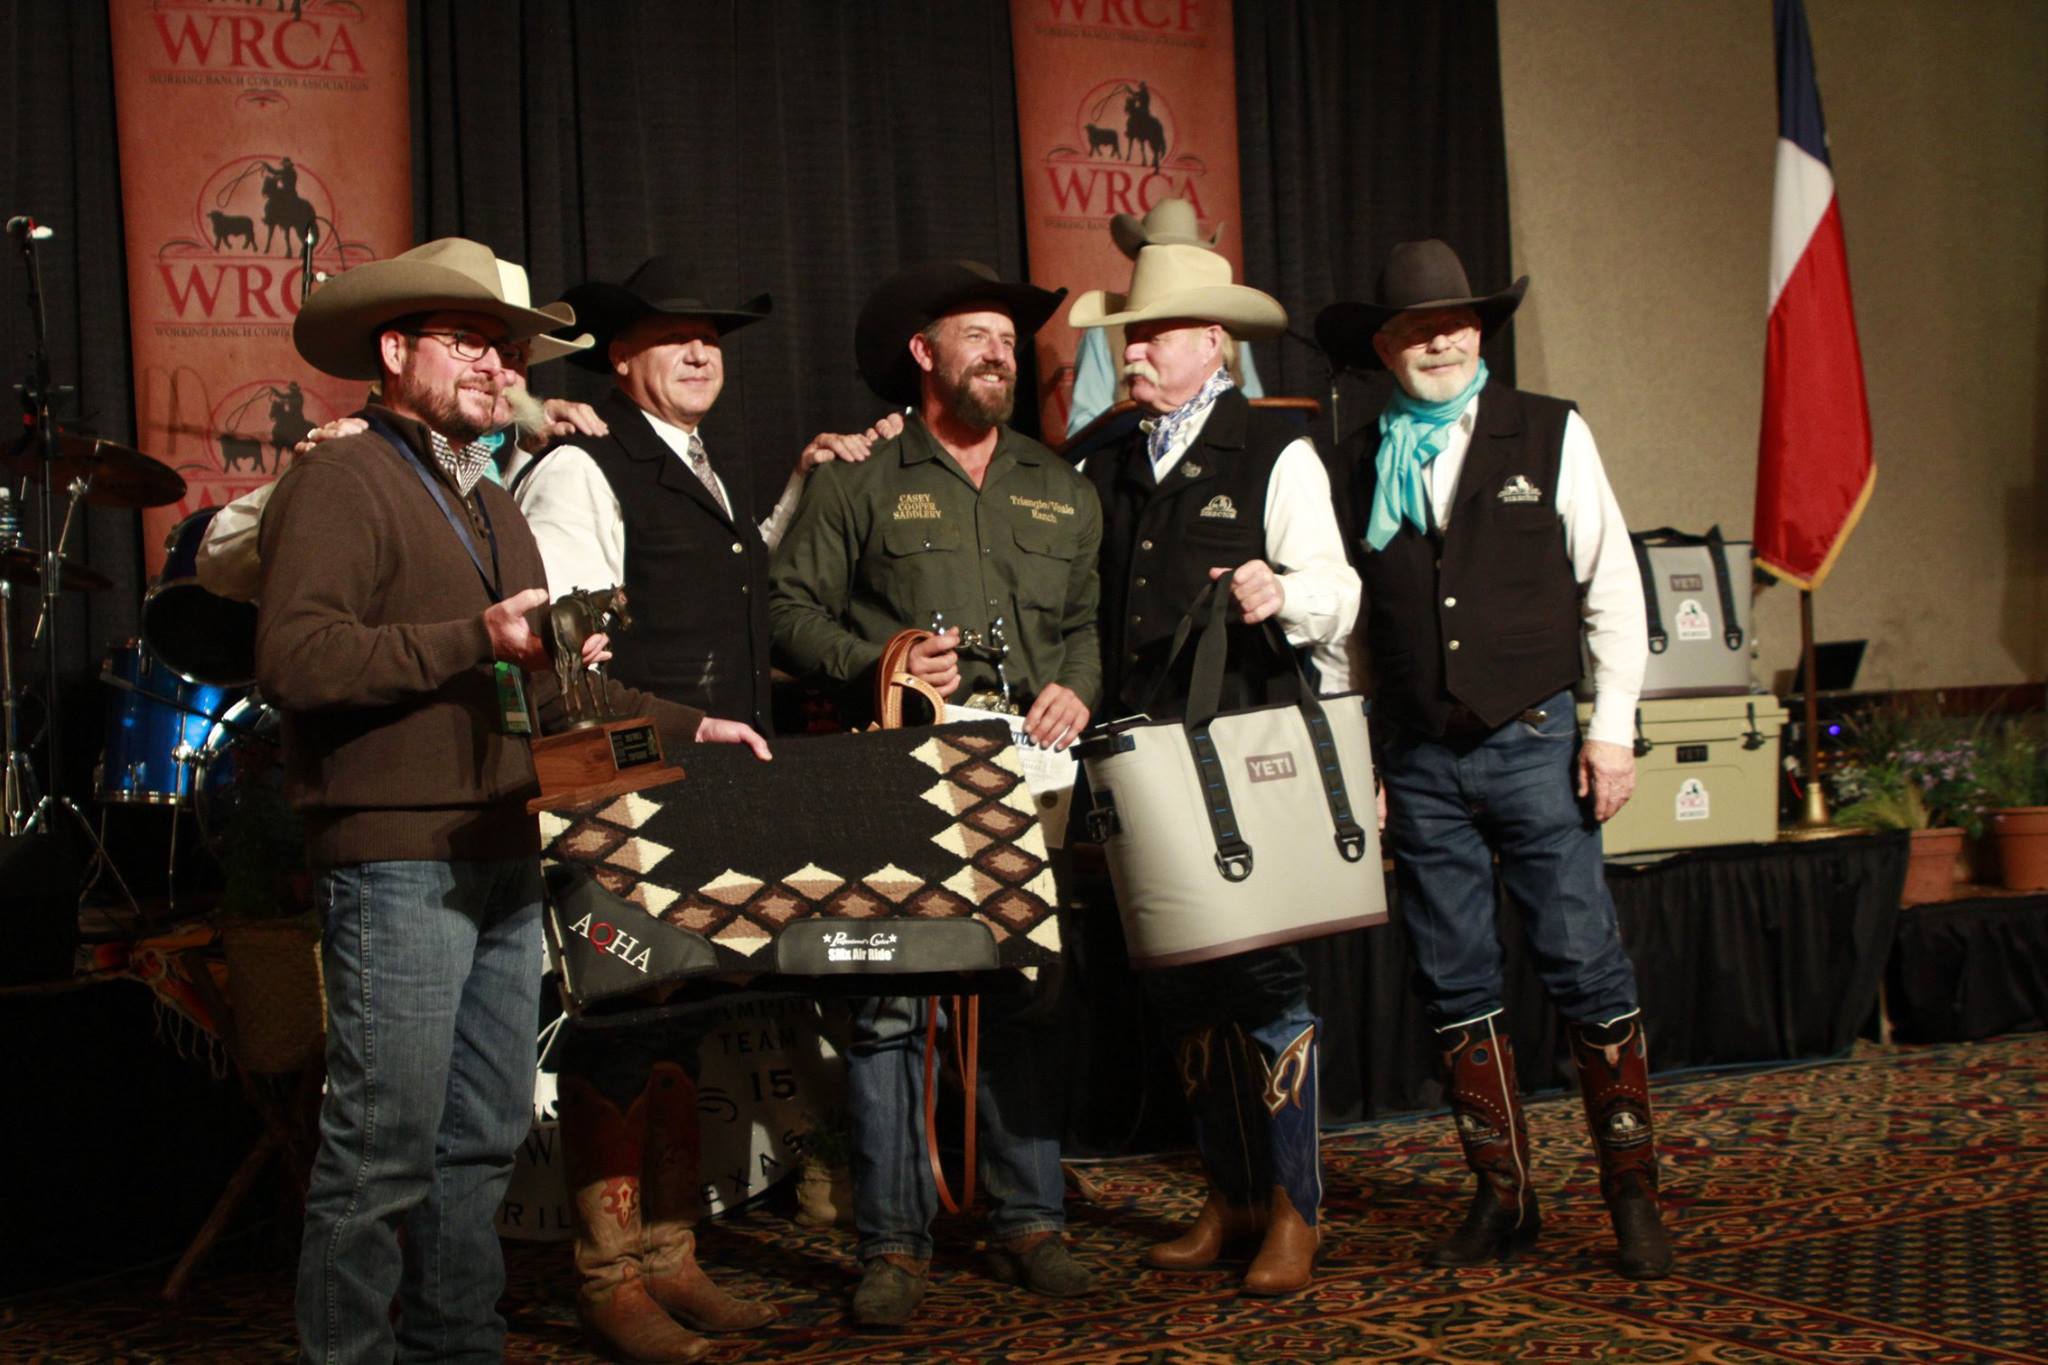 Top Horse and Top American Quarter Horse Dmac Dow Jones, owned by Buster Frierson of Veale Ranch & Triangle Ranch